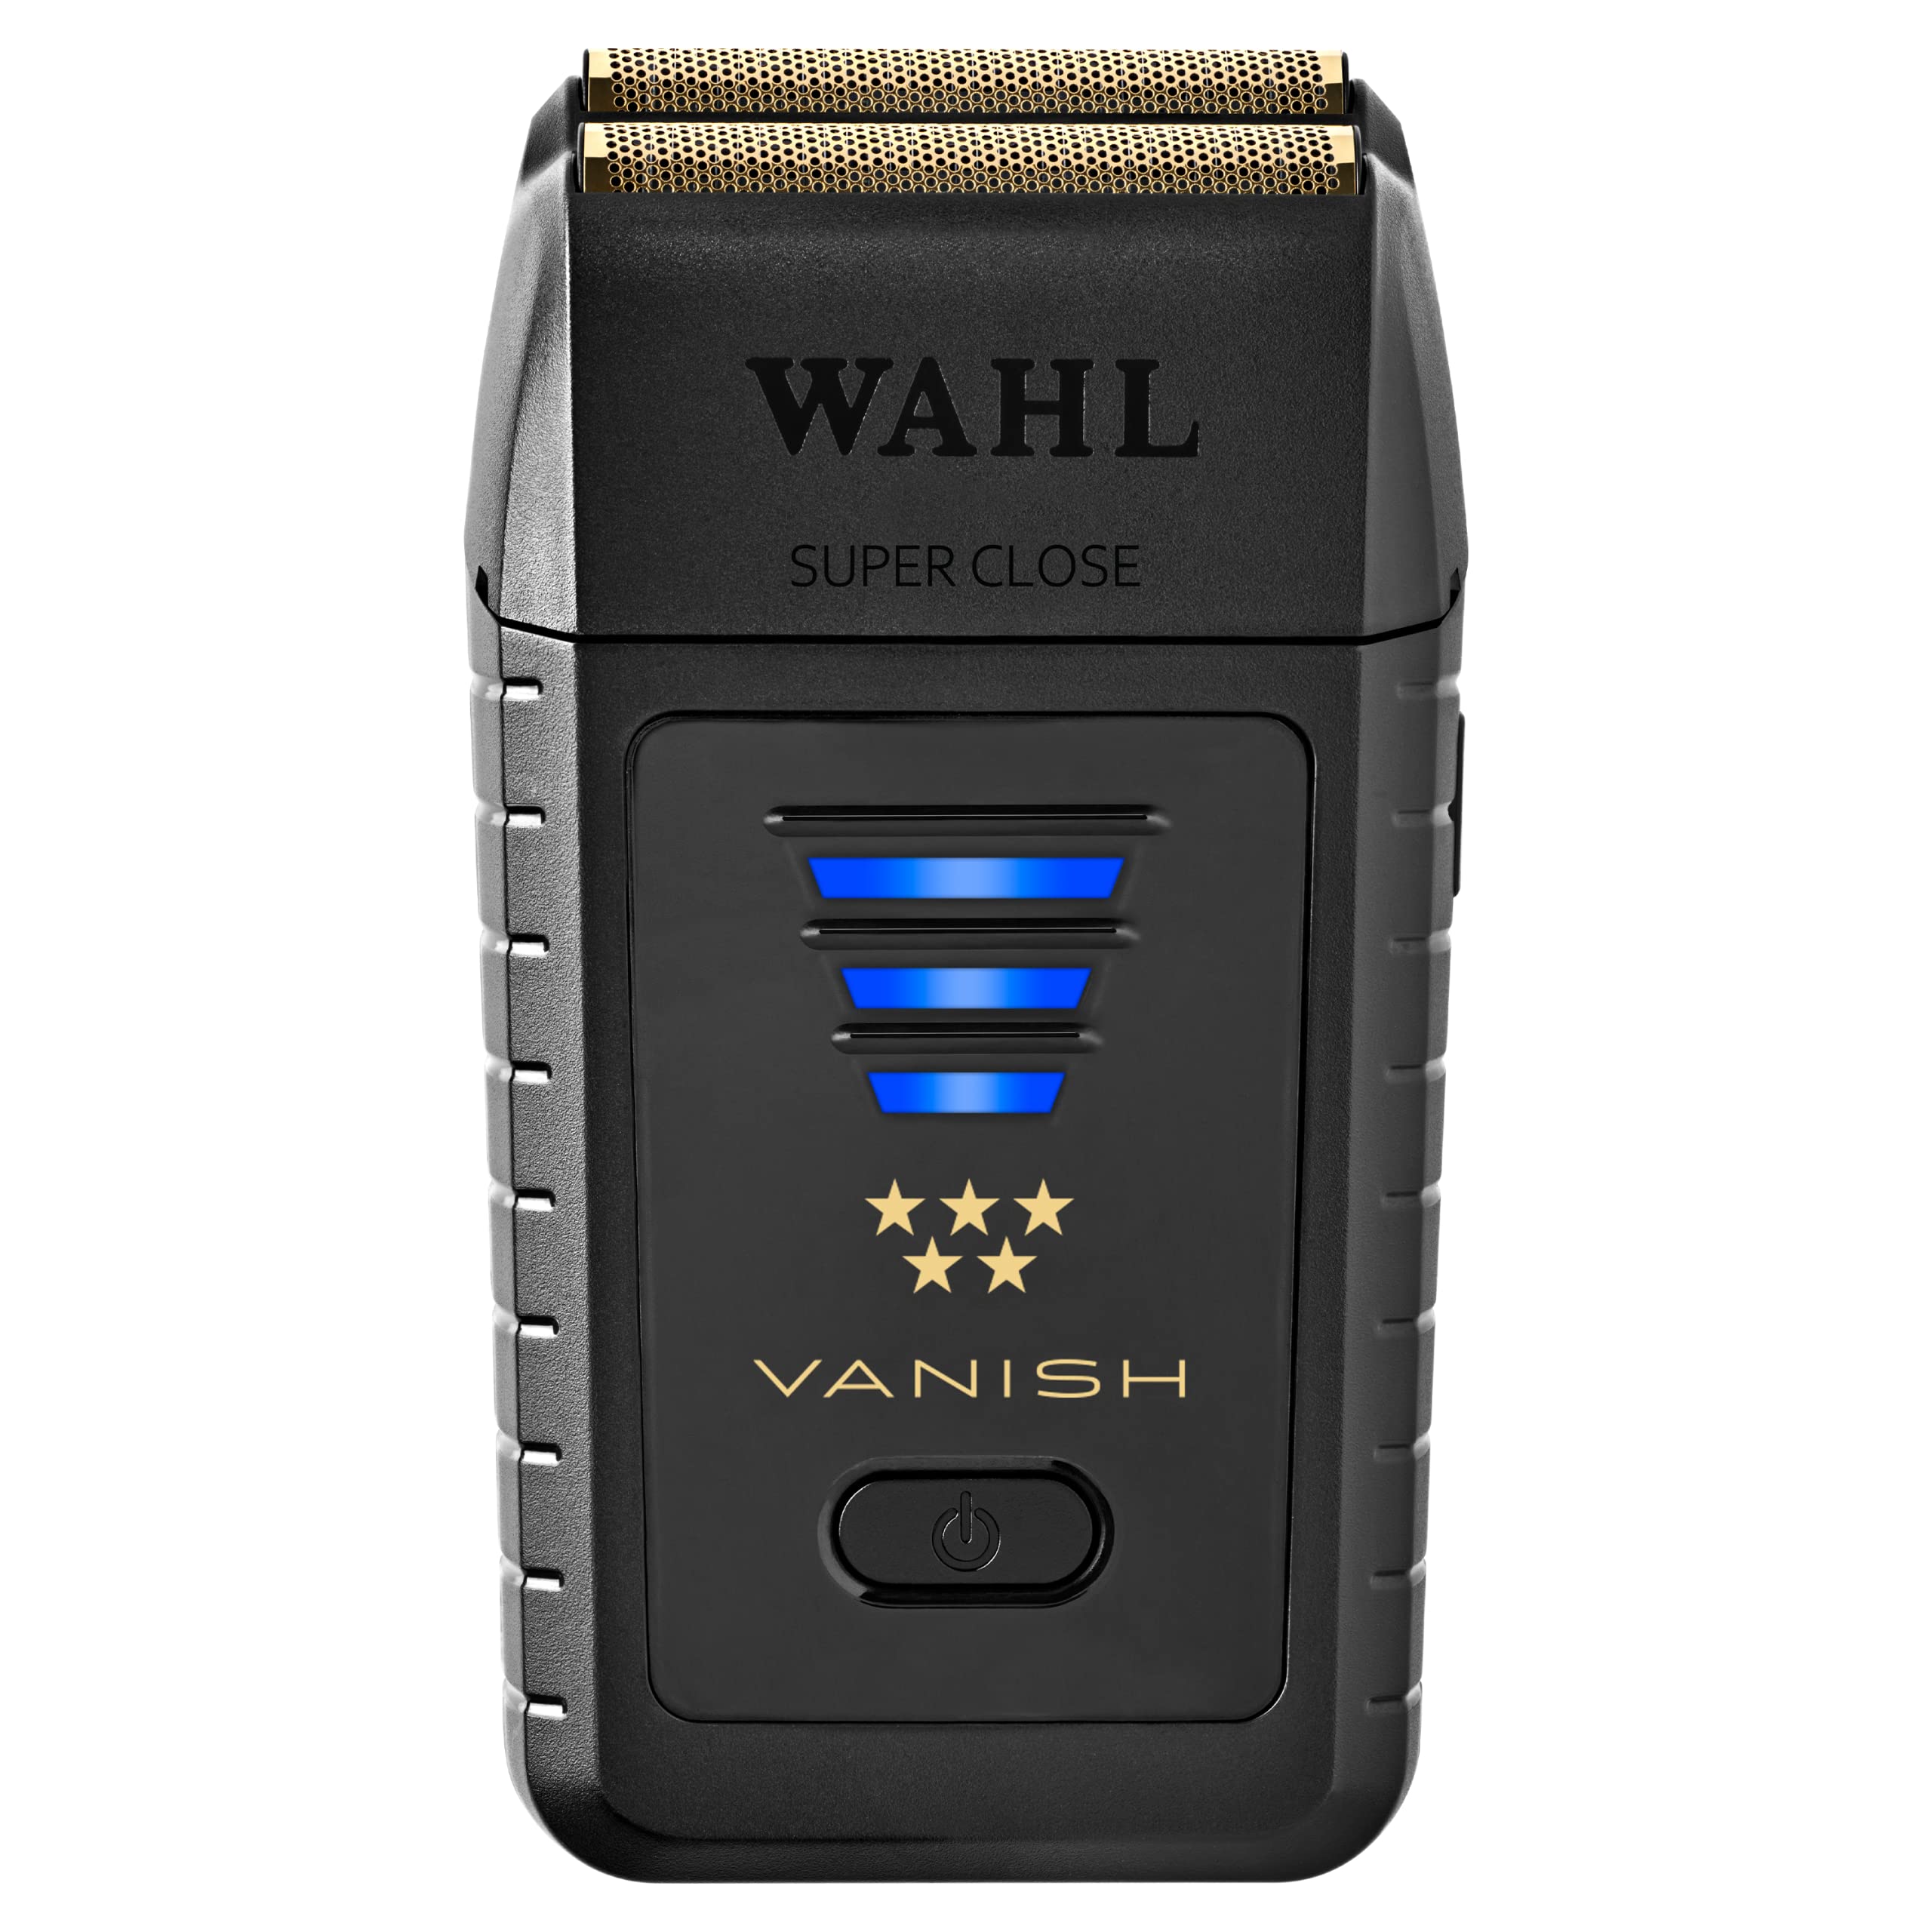 Wahl Vanish Shaver 8173 For A Clean Shave With No Irritation